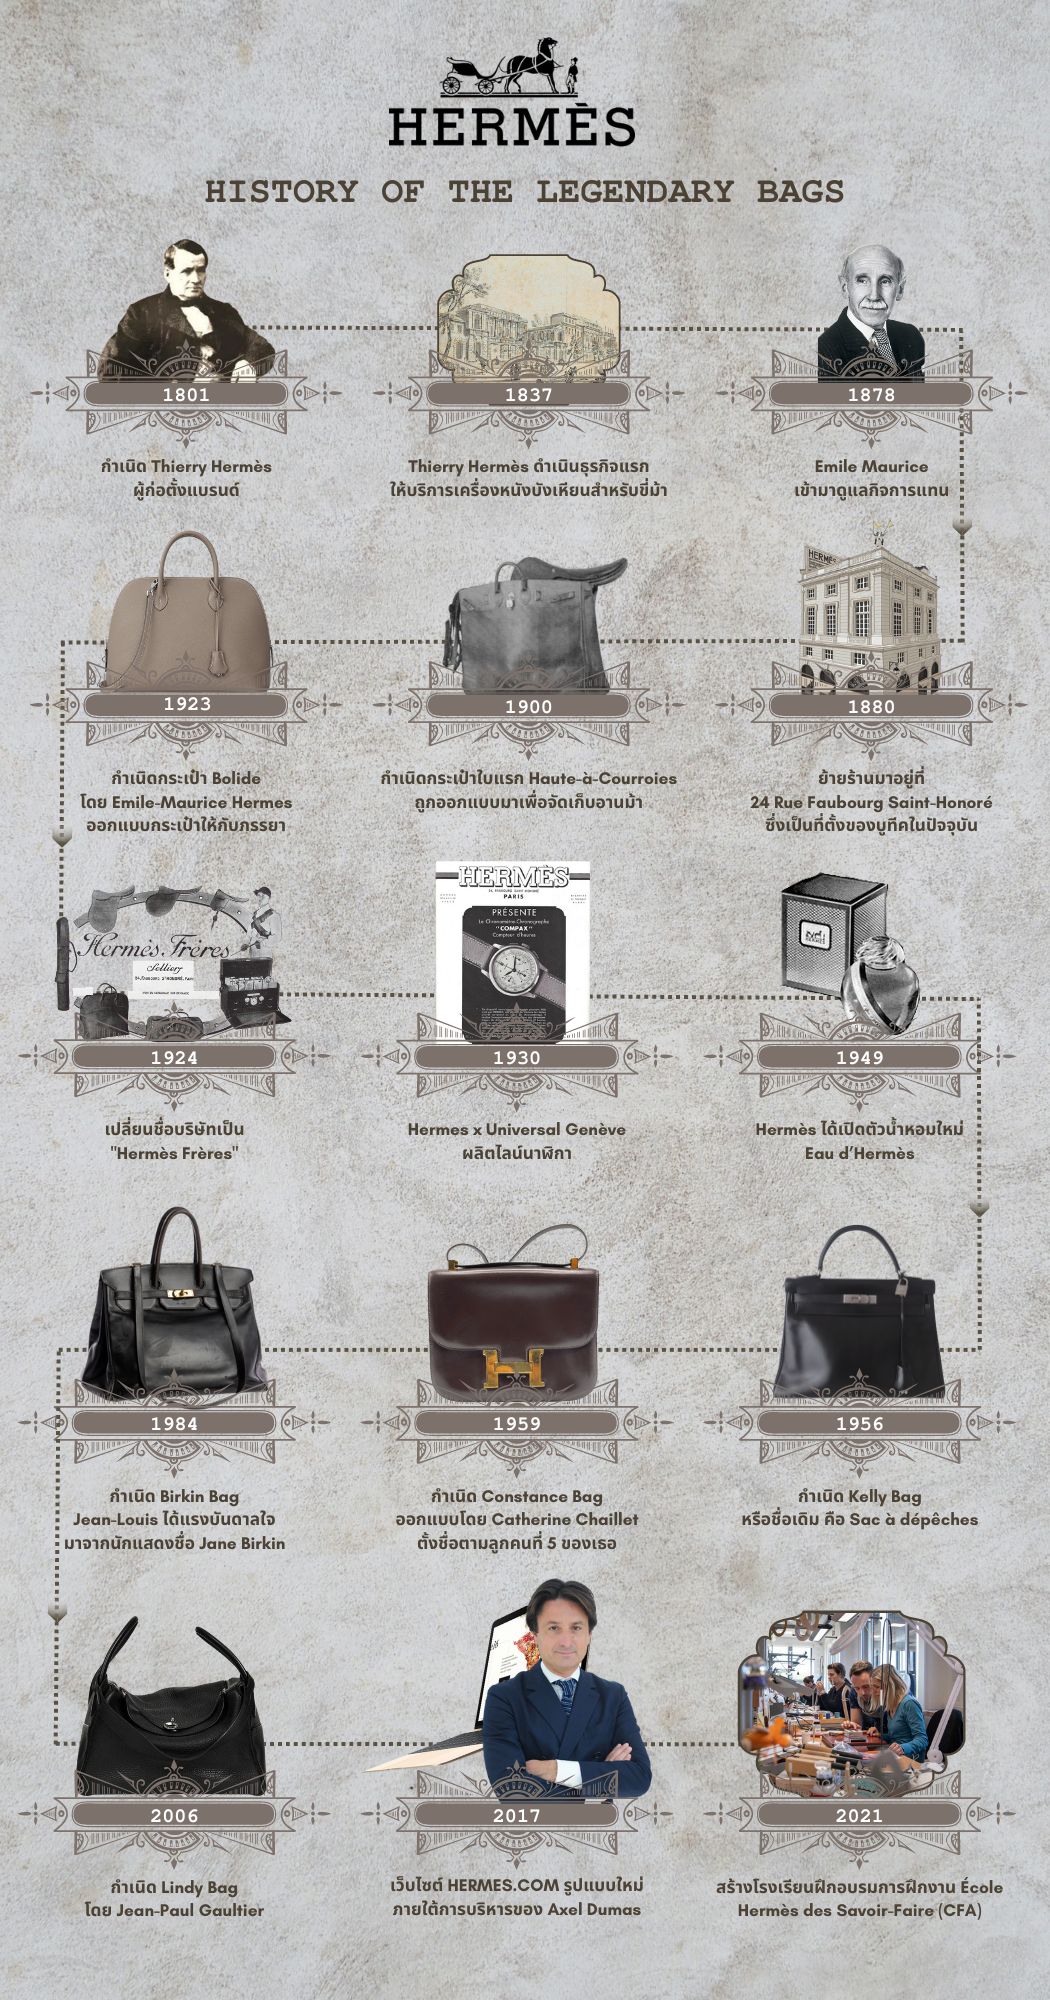 HISTORY OF THE LEGENDARY BAGS